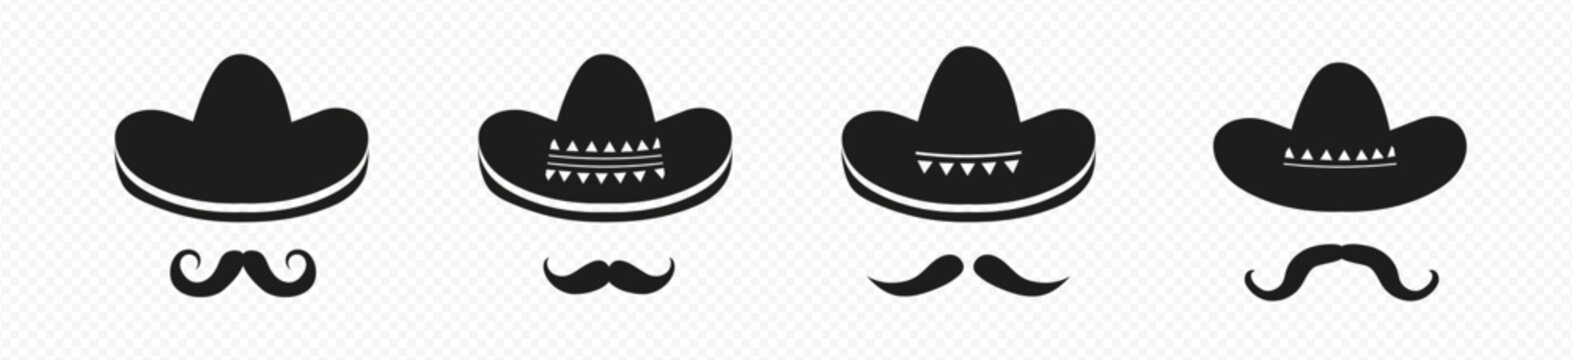 Black mexican sombrero hats with mustache set. Spanish traditional hat with long brim for latin american parties and mariachi and fun vector fiestas